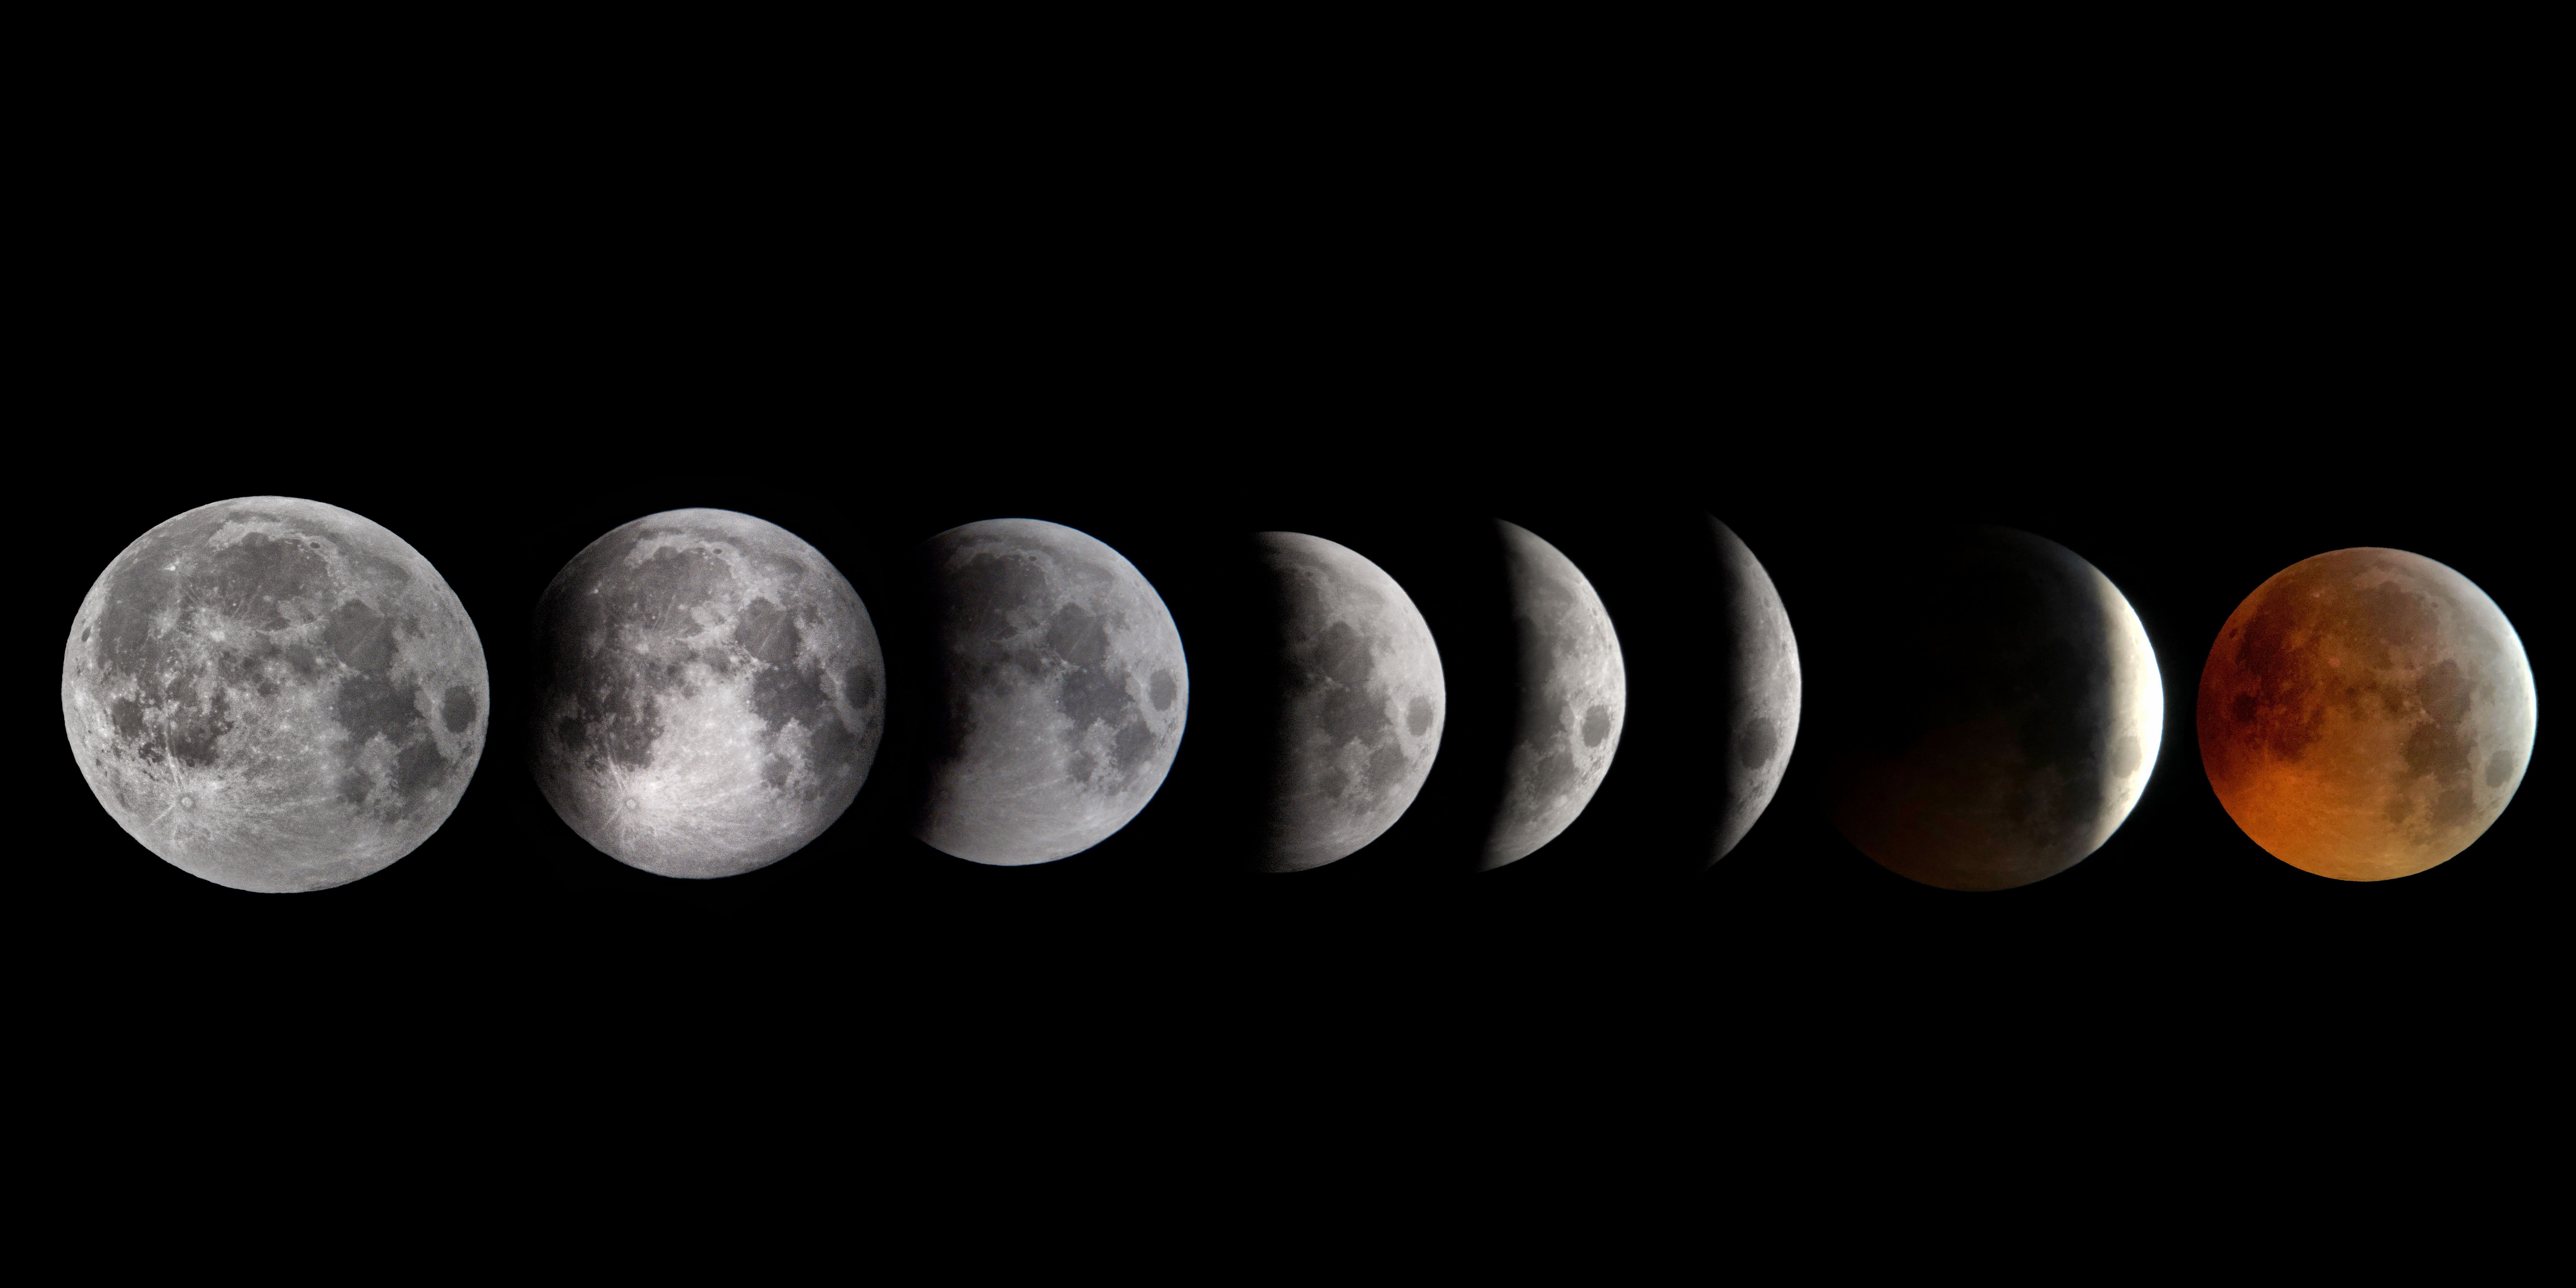 Peace Beauty Life Light Wisdom Love Imagination: A sequence of the Total Lunar Eclipse from last weekend [8000x4000][OC]